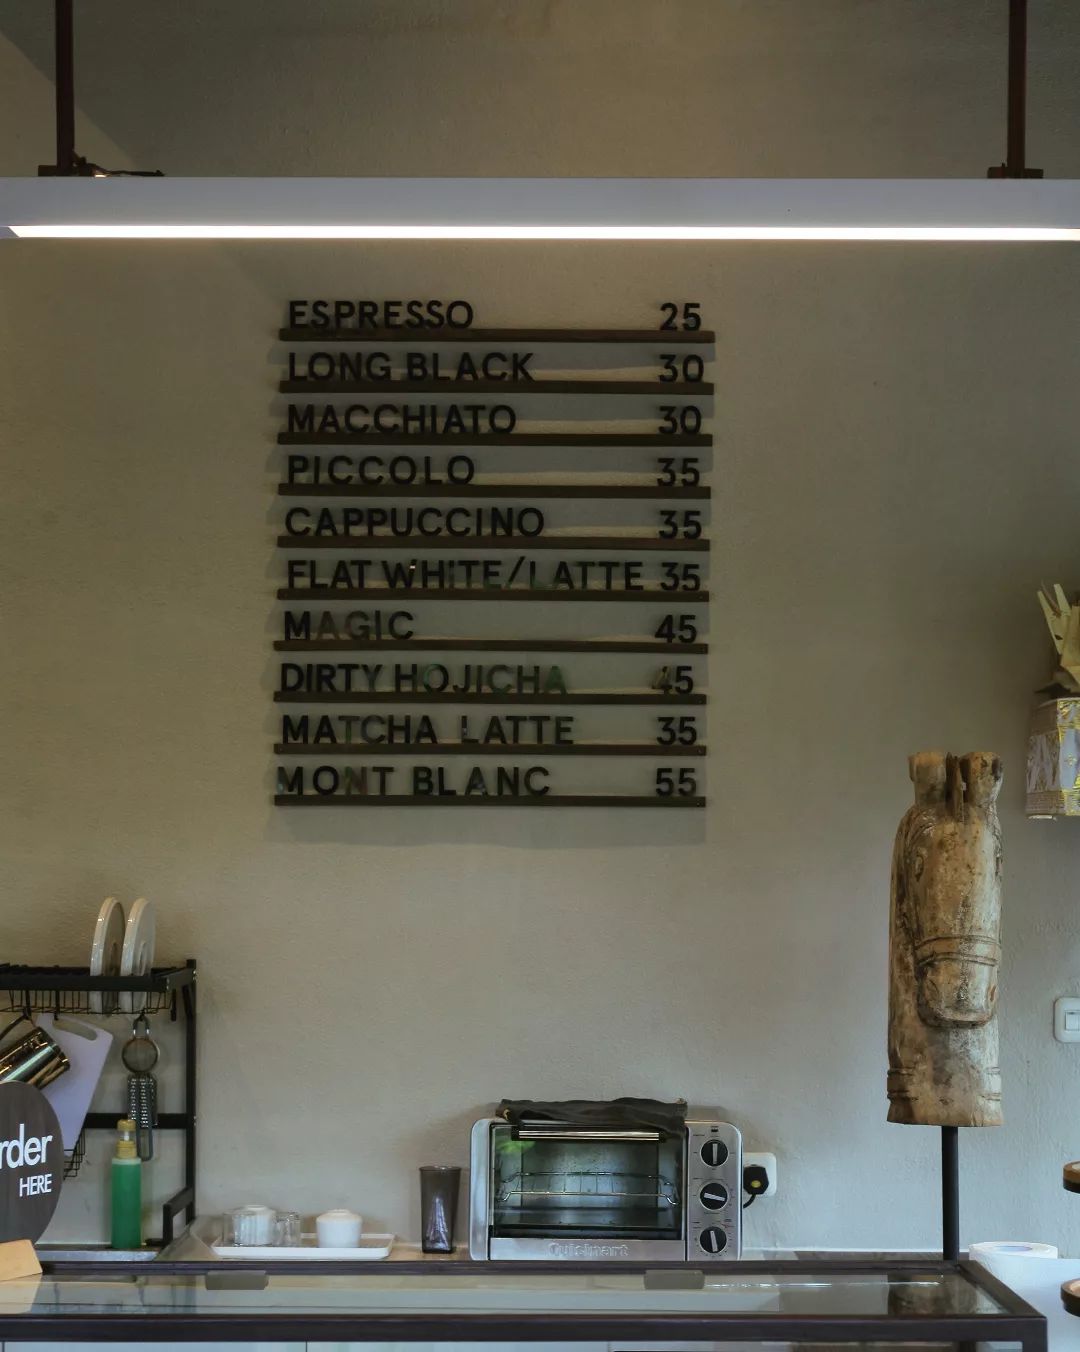 Harga Menu Picco Coffee Bali Image From @iwanthejourney